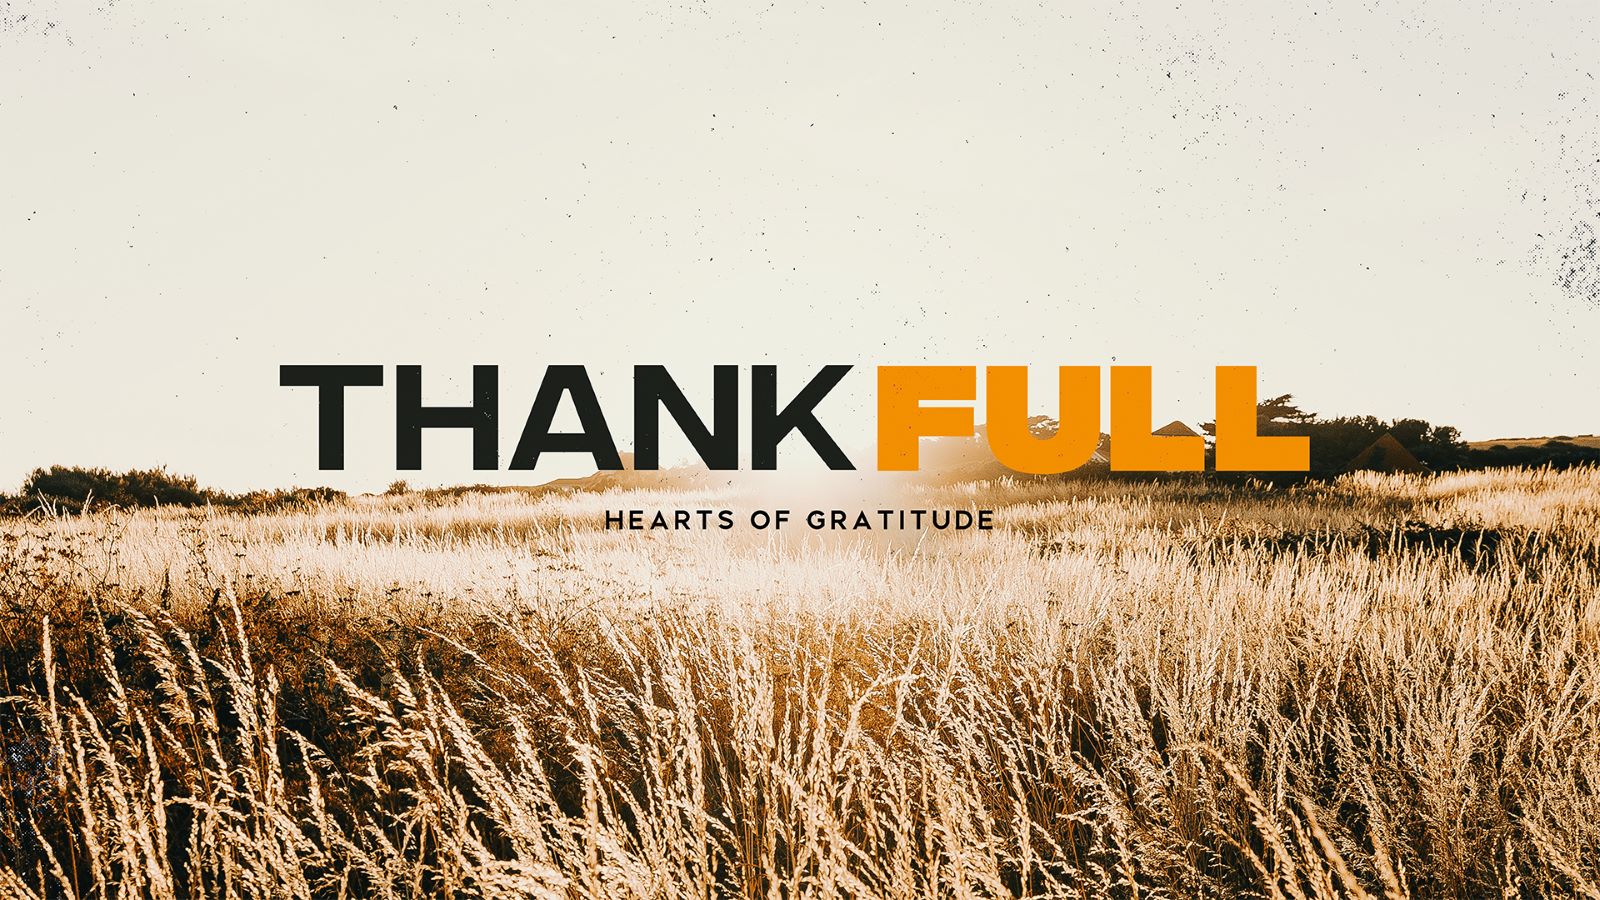 Thankful for Jesus Christ, the Cornerstone of our Faith Image